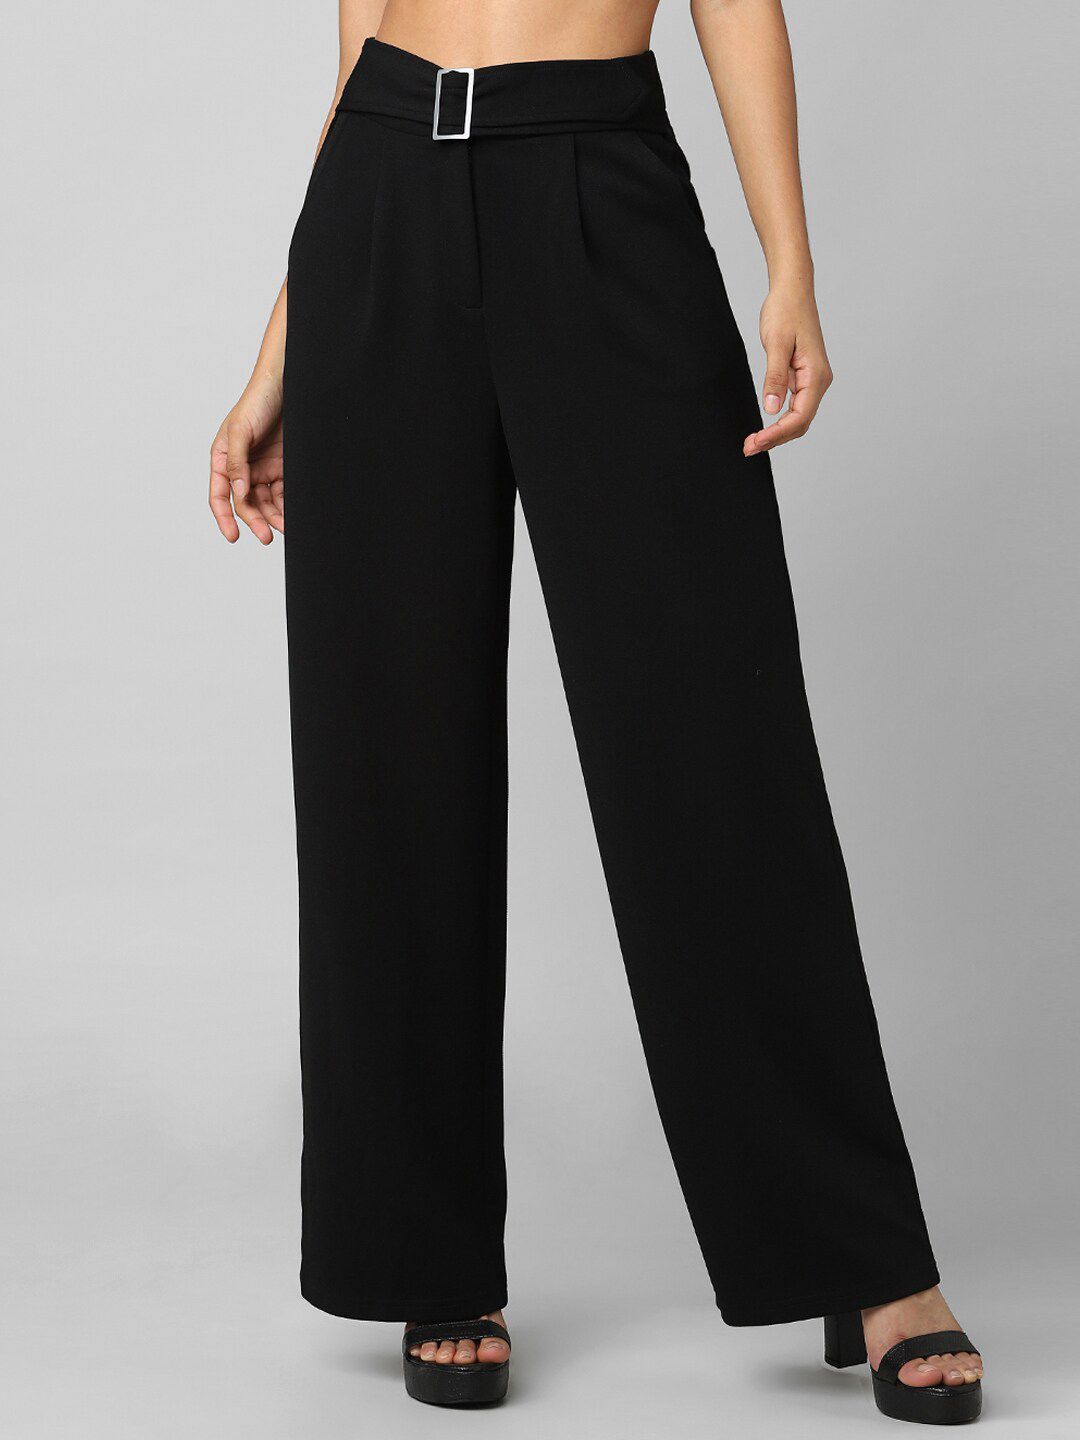 ONLY Women Black Flared High-Rise Pleated Trousers Price in India